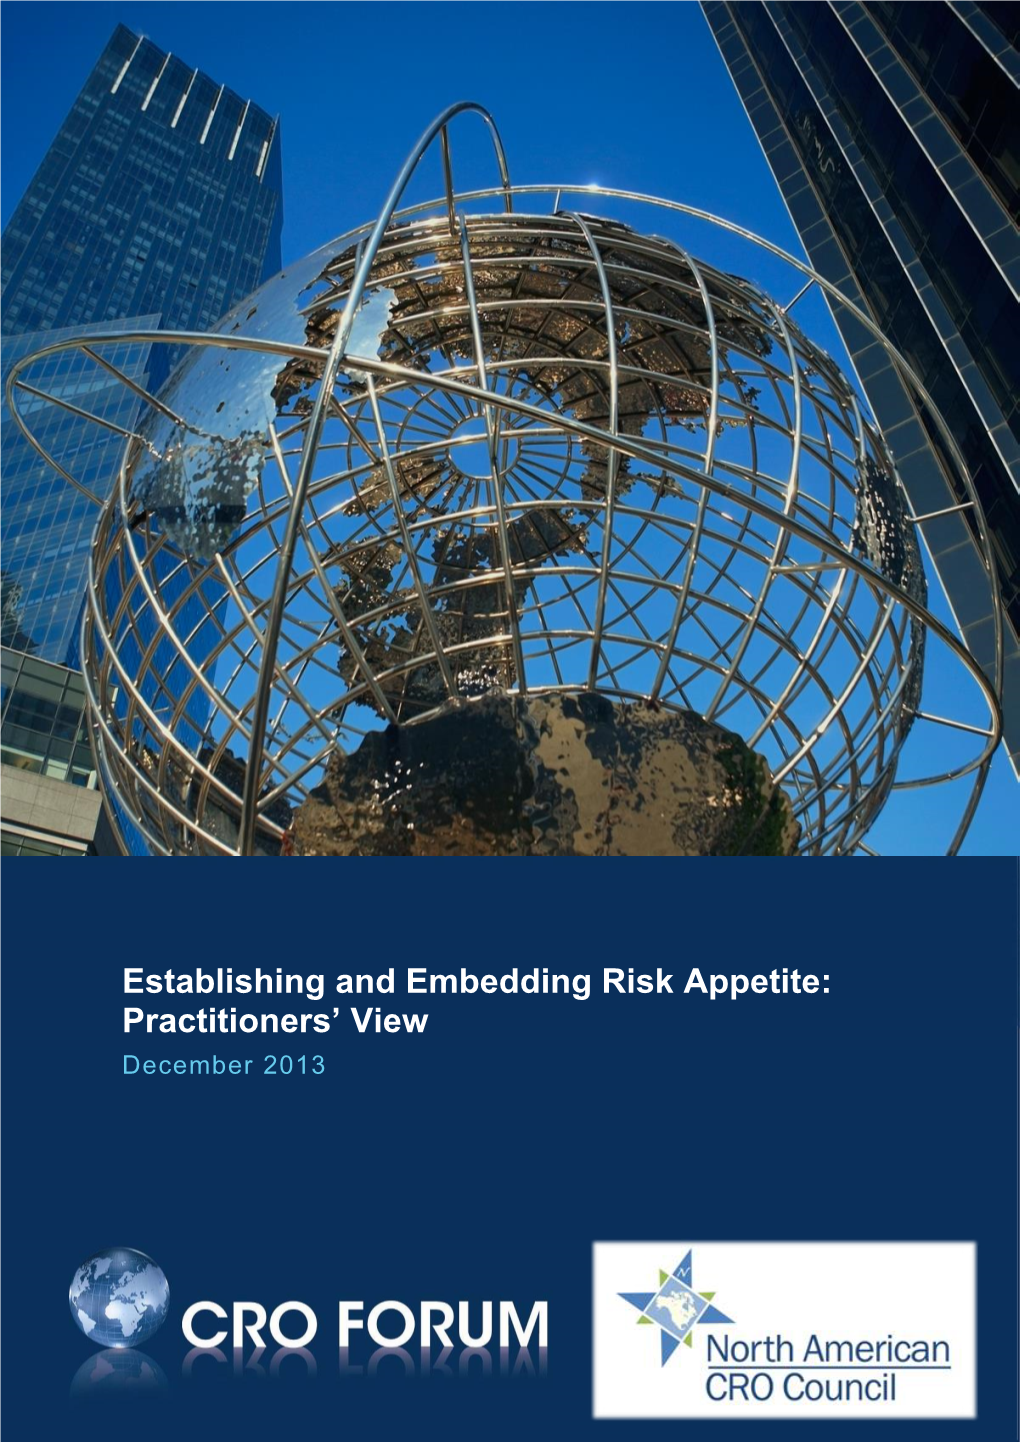 Establishing and Embedding Risk Appetite: Practitioners' View